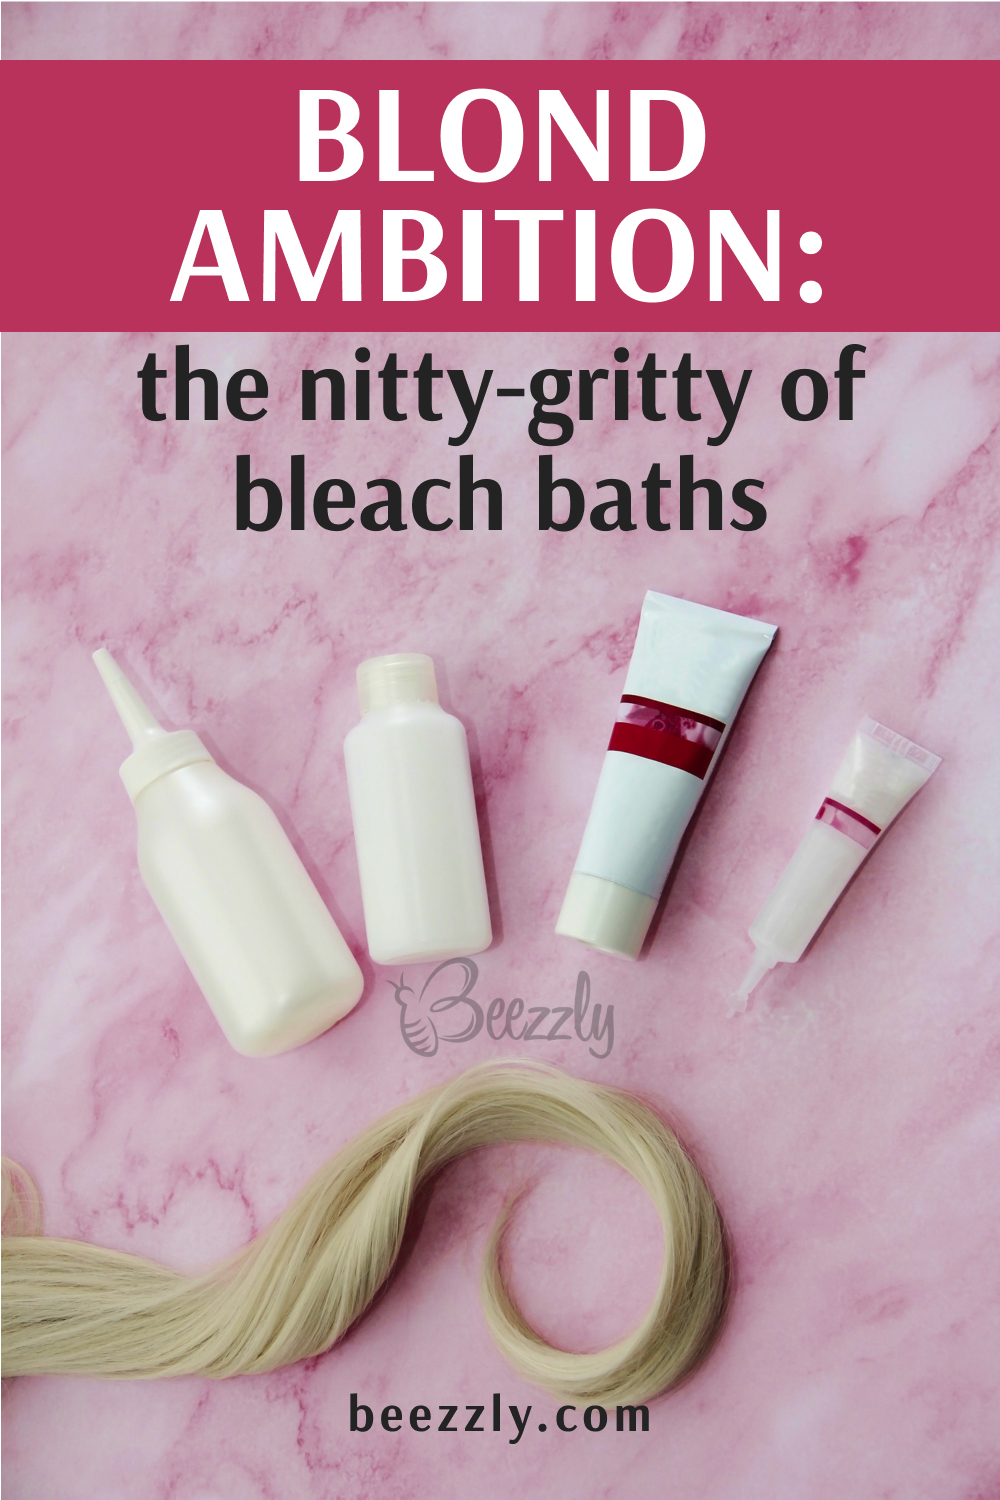 Blond Ambition The Nitty Gritty of Bleach Baths